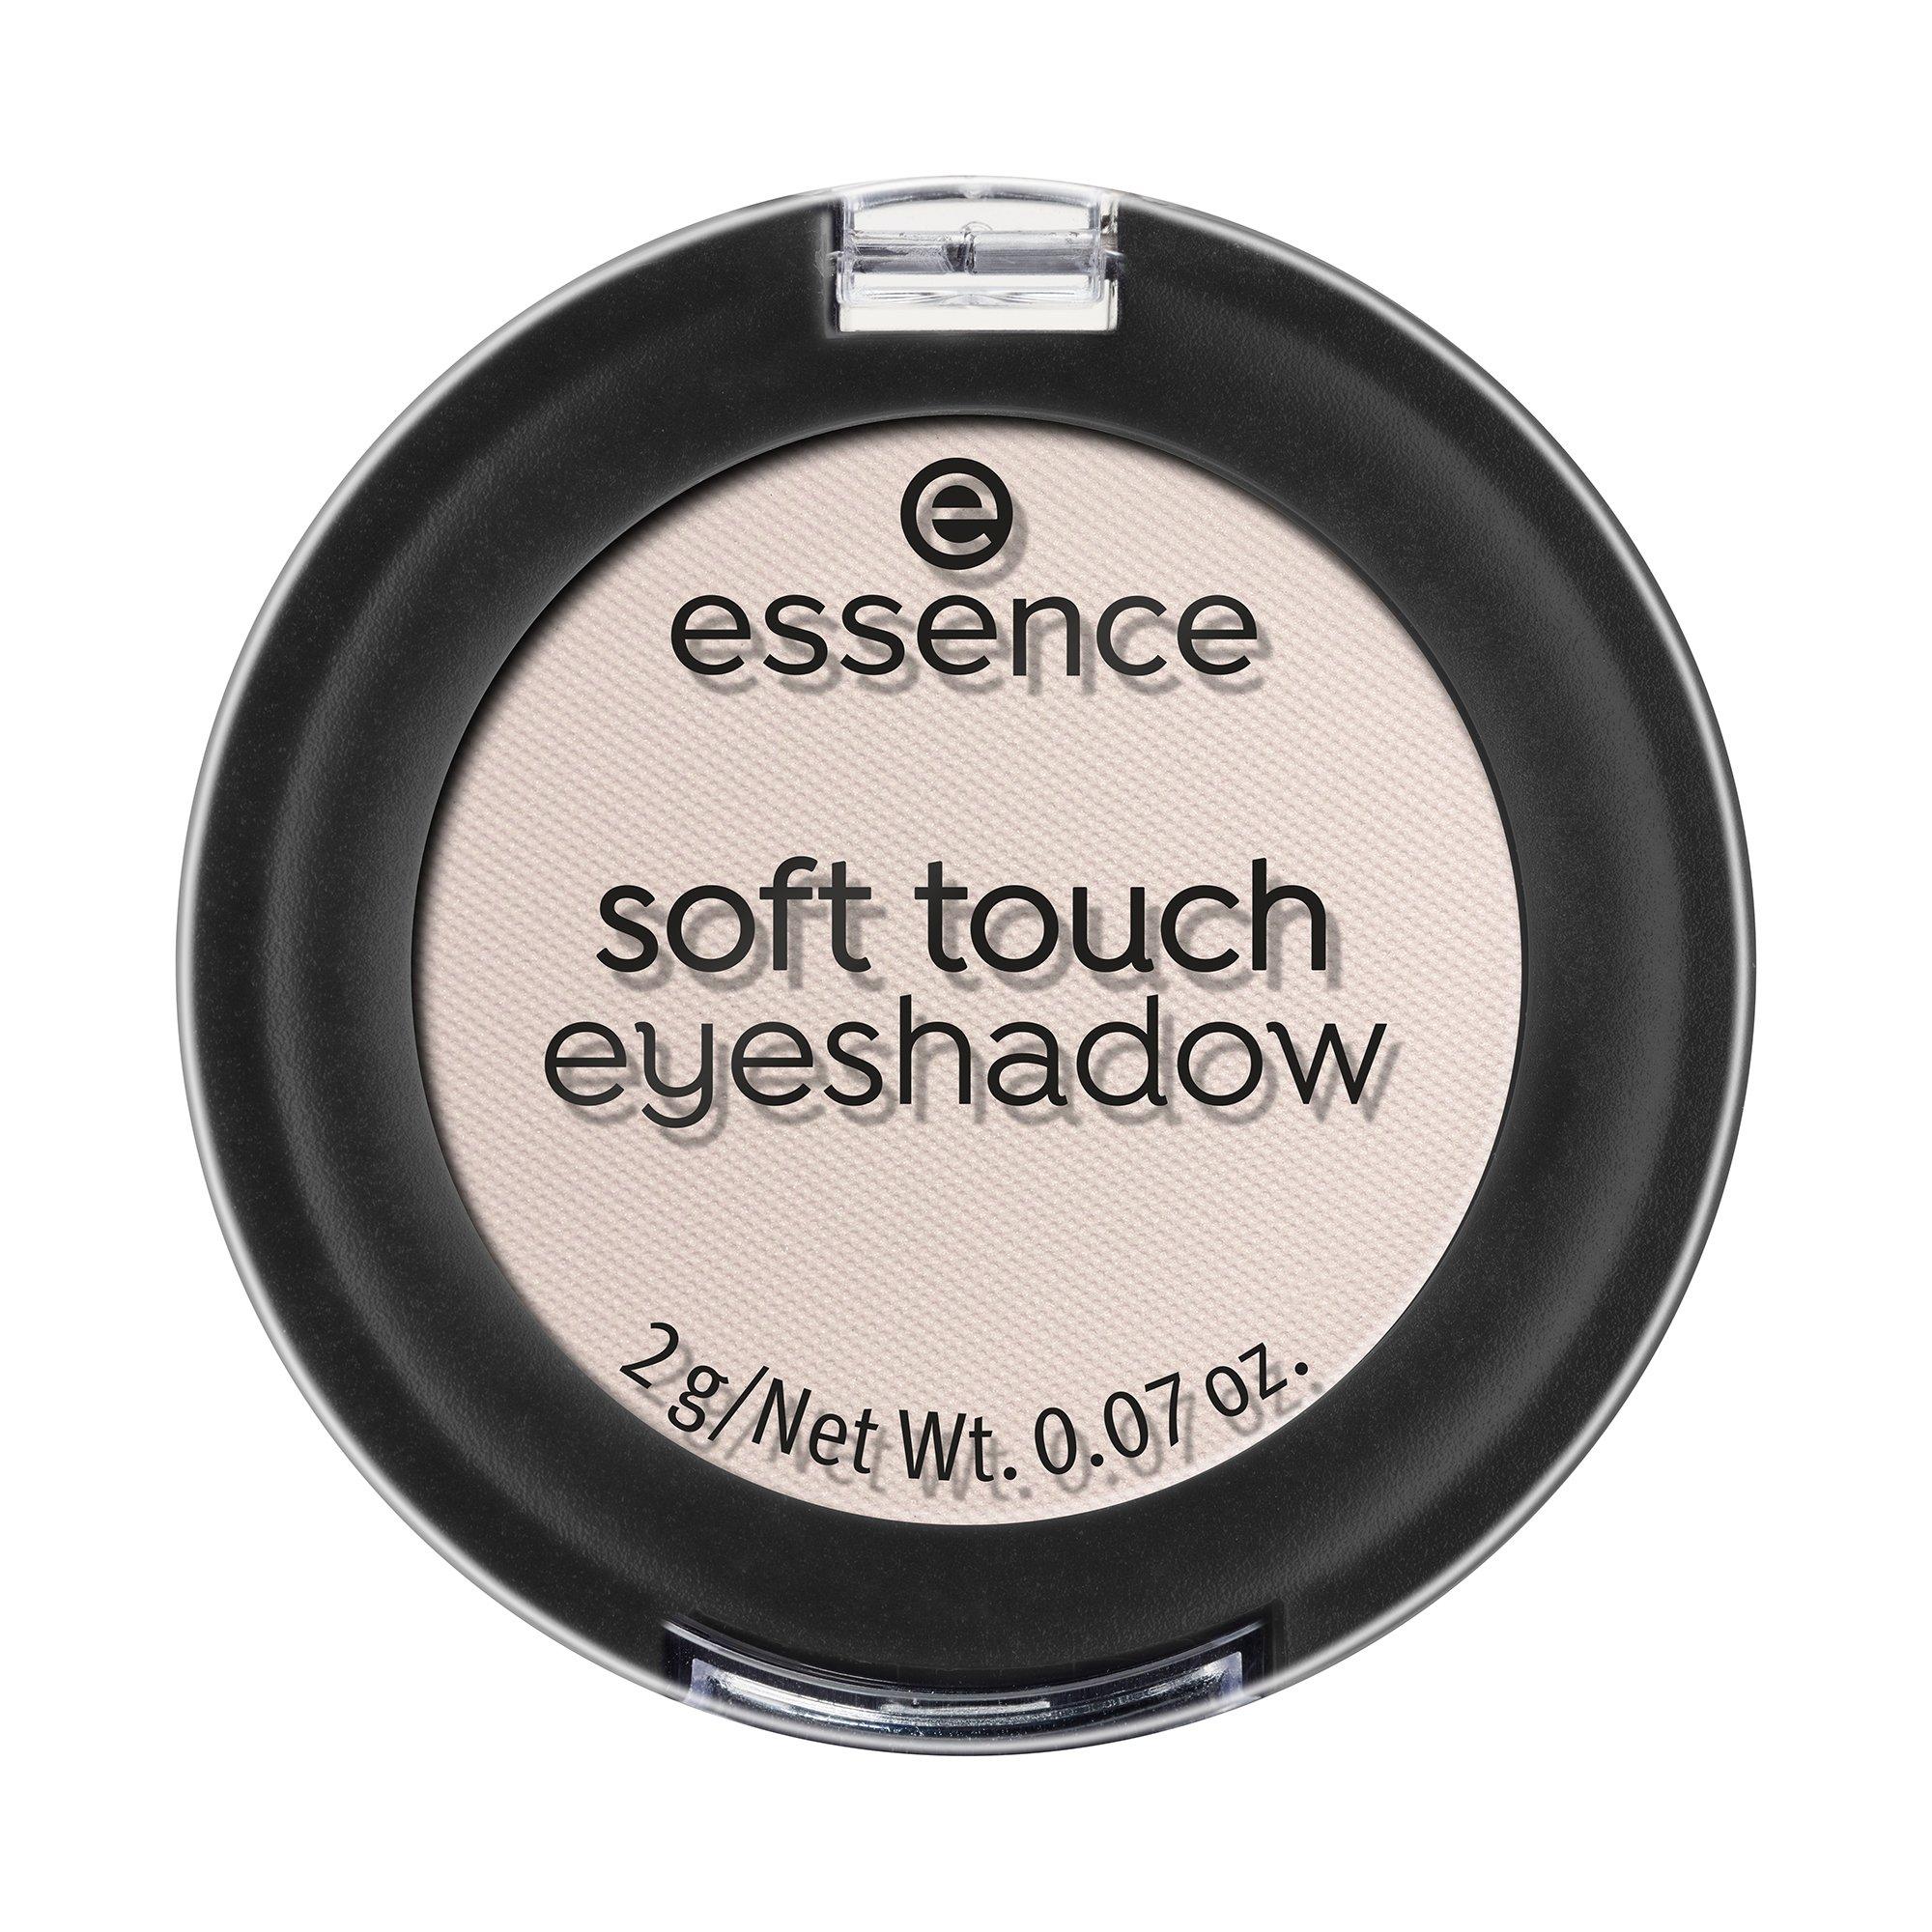 Image of essence Soft Touch Eyeshadow Soft Touch Eyeshadow - 2g